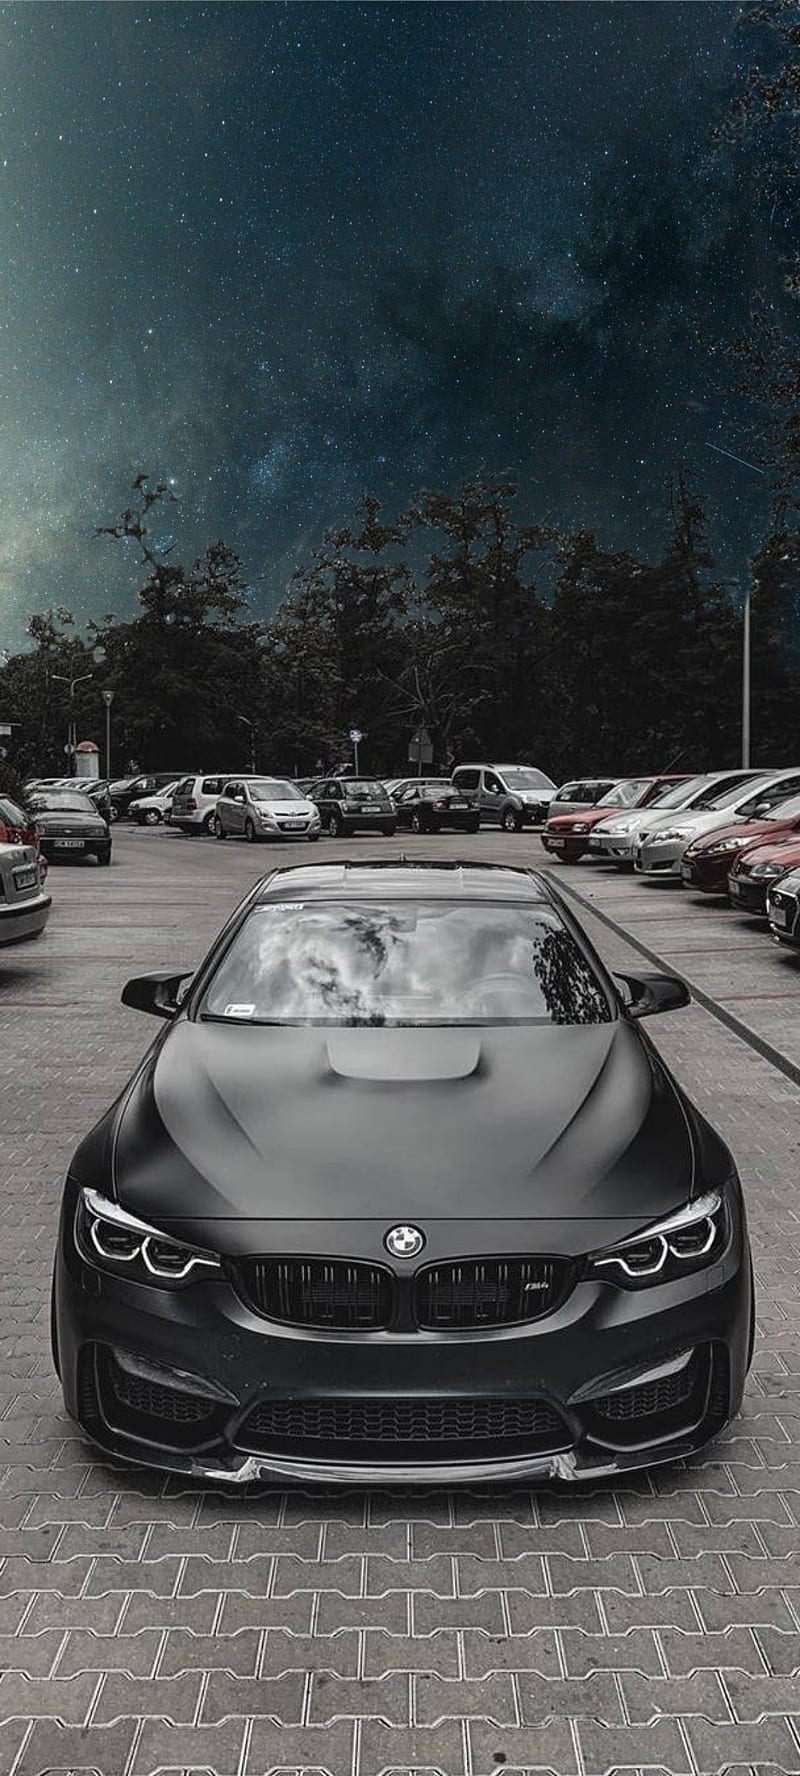 BMW M4 iPhone Wallpapers Top 25 Best BMW M4 iPhone Wallpapers  Getty  Wallpapers